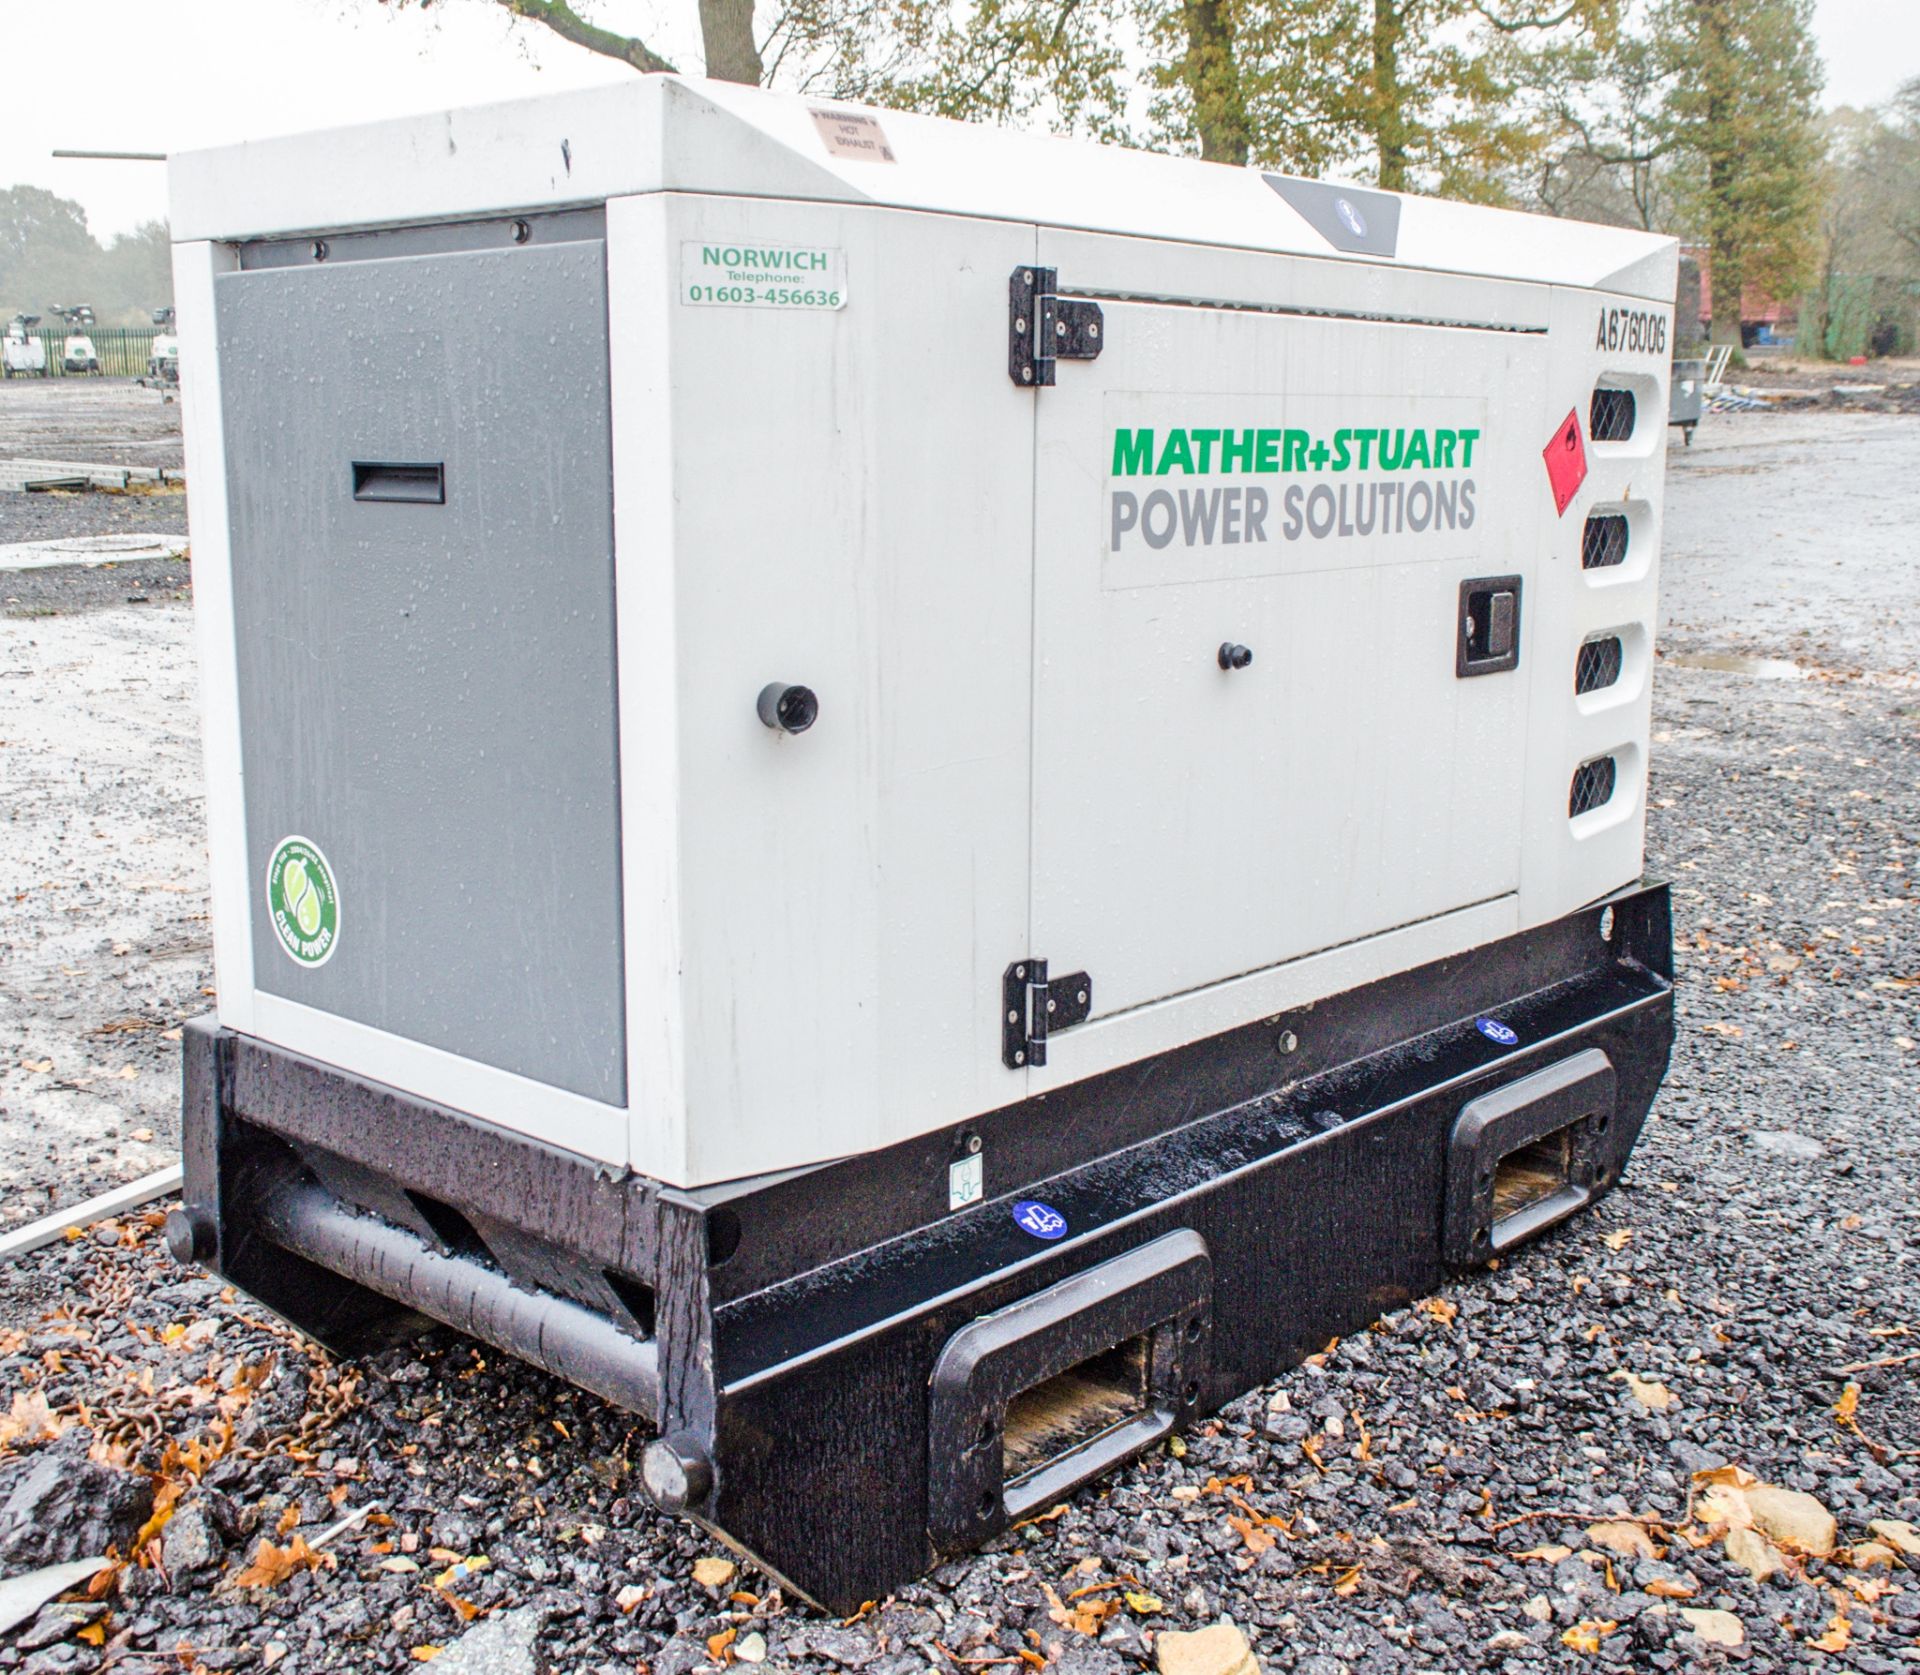 SDMO RC16CC 15 kva diesel driven generator Year: 2015 S/N: 15005632 Recorded Hours: 9245 A676006 - Image 2 of 6